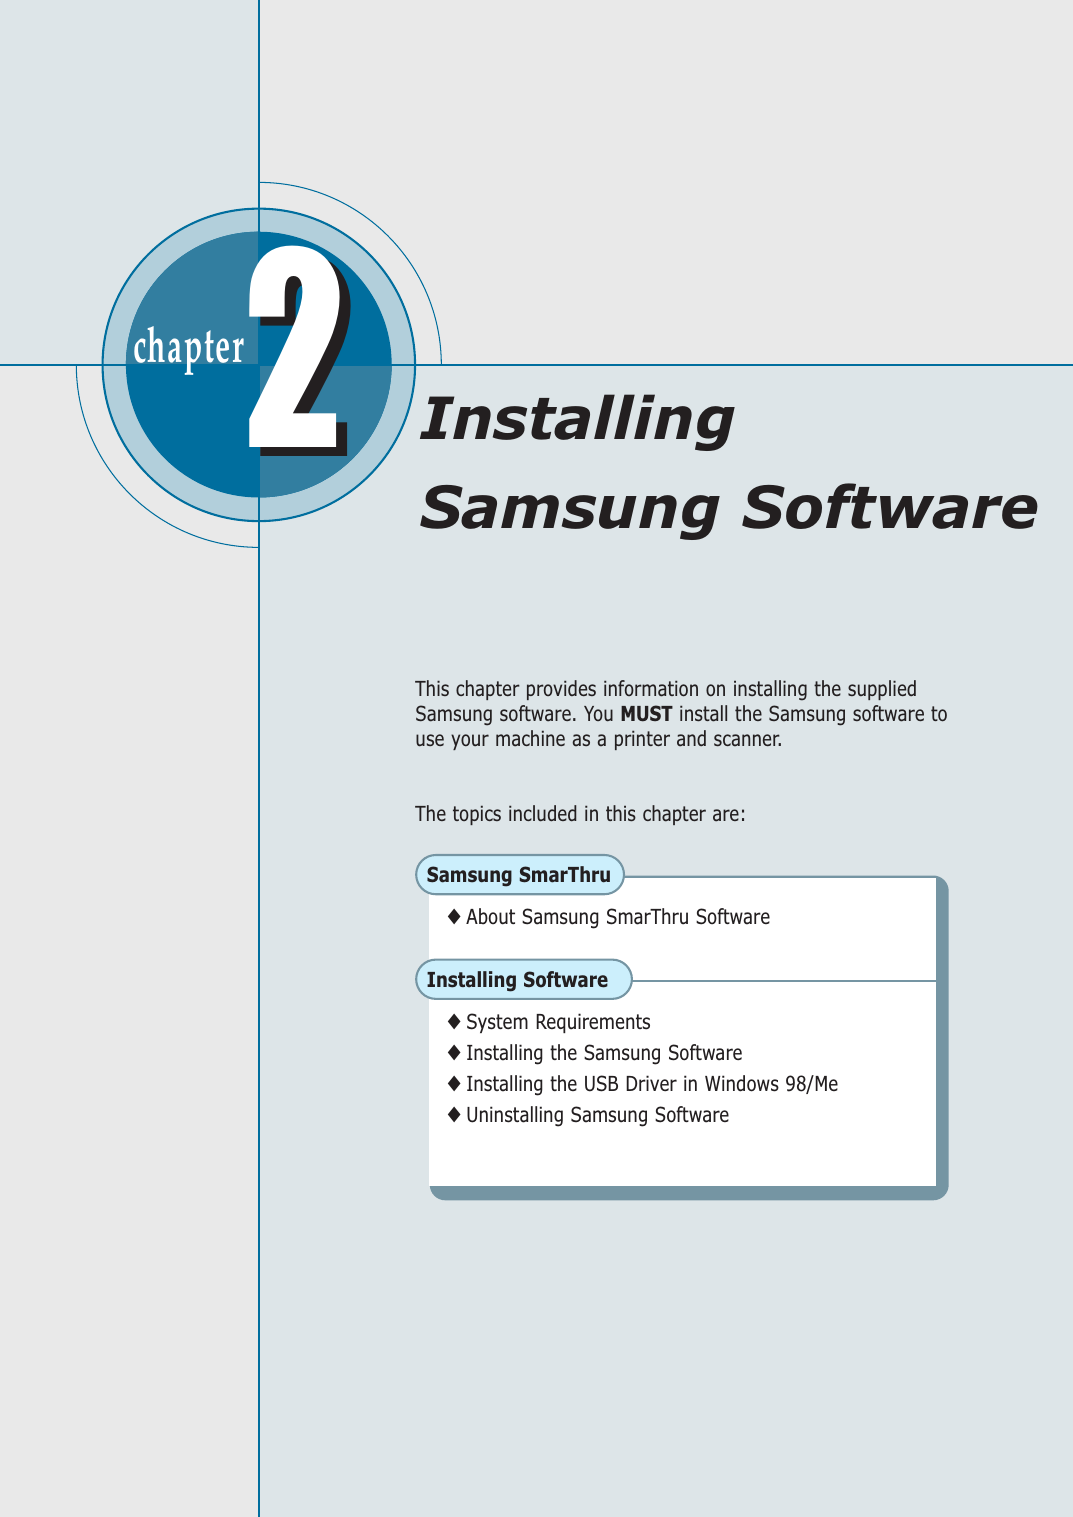 chapter  22This chapter provides information on installing the suppliedSamsung software. You MUST install the Samsung software touse your machine as a printer and scanner.The topics included in this chapter are:Samsung SmarThru◆ About Samsung SmarThru SoftwareInstalling Software◆ System Requirements◆ Installing the Samsung Software◆ Installing the USB Driver in Windows 98/Me◆ Uninstalling Samsung SoftwareInstalling Samsung Software